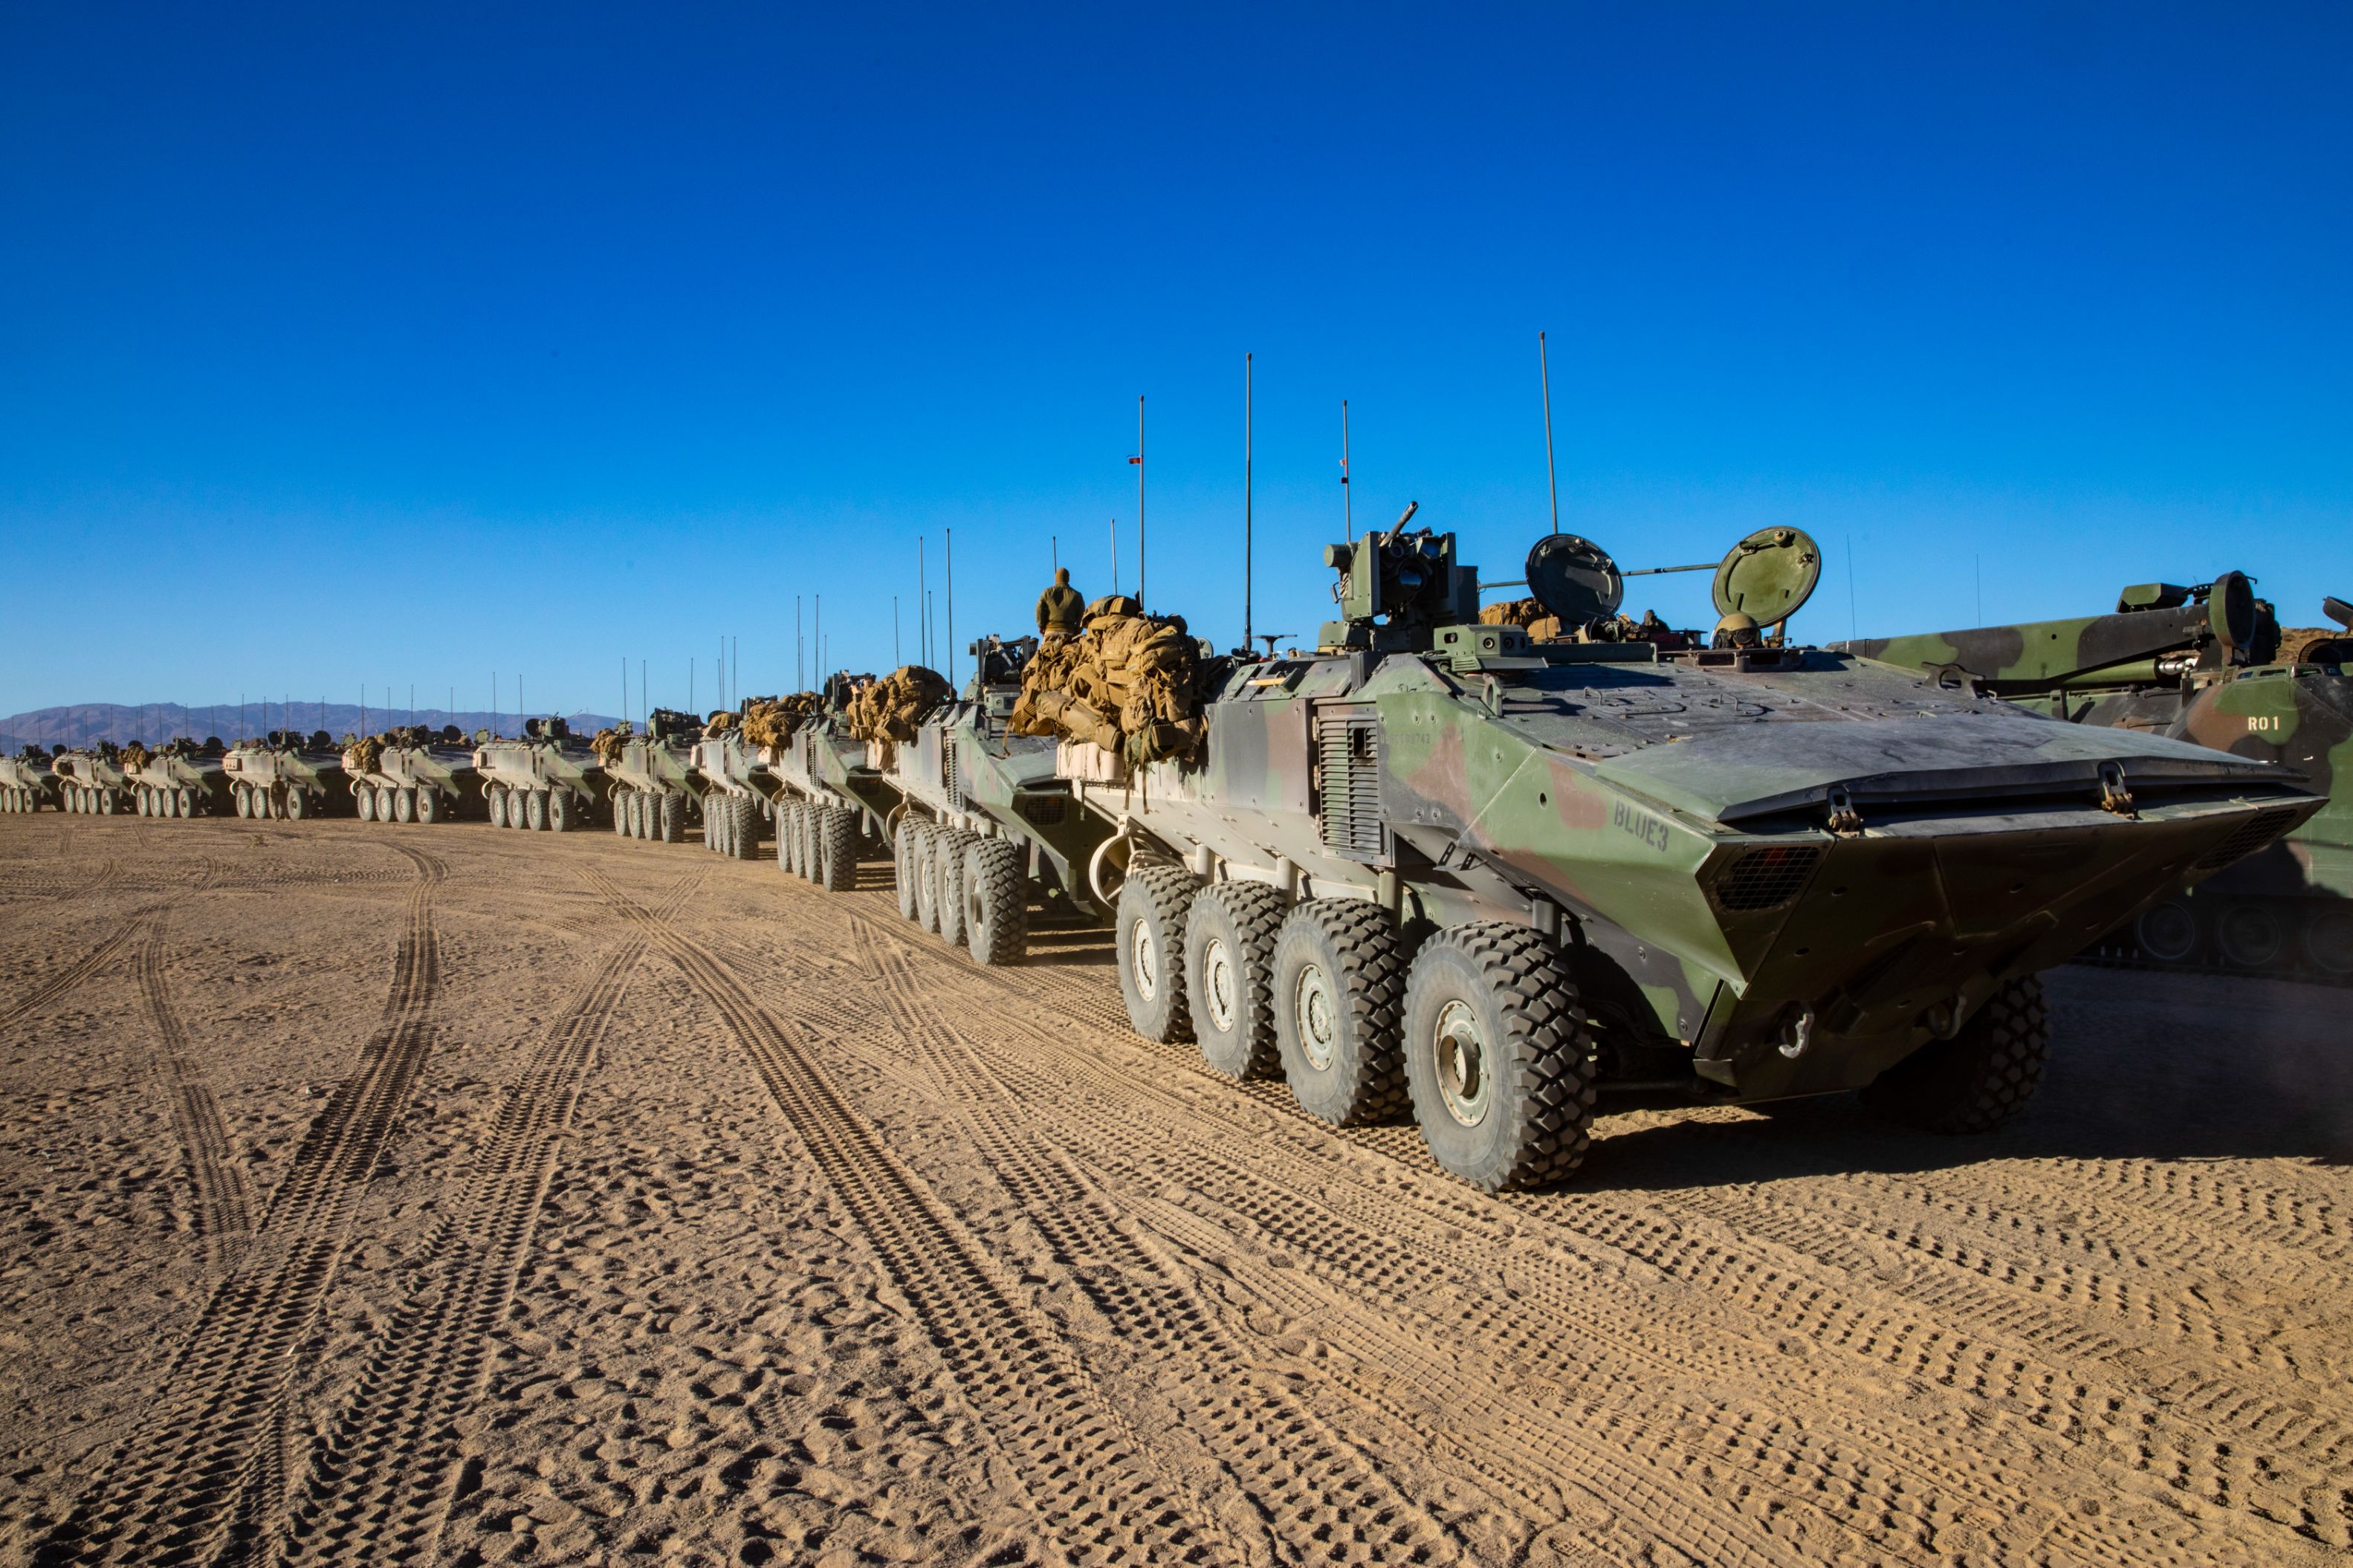 U.S. Marine Corps Amphibious Combat Vehicles (ACV) with Co. D, 3rd Assault Amphibian Battalion, 1st Marine Division, move in a convoy at the conclusion of Marine Air Ground Task Force Warfighting Exercise (MWX) 2-21 at Marine Corps Air Ground Combat Center, Twentynine Palms, Calif., Feb. 20, 2021.